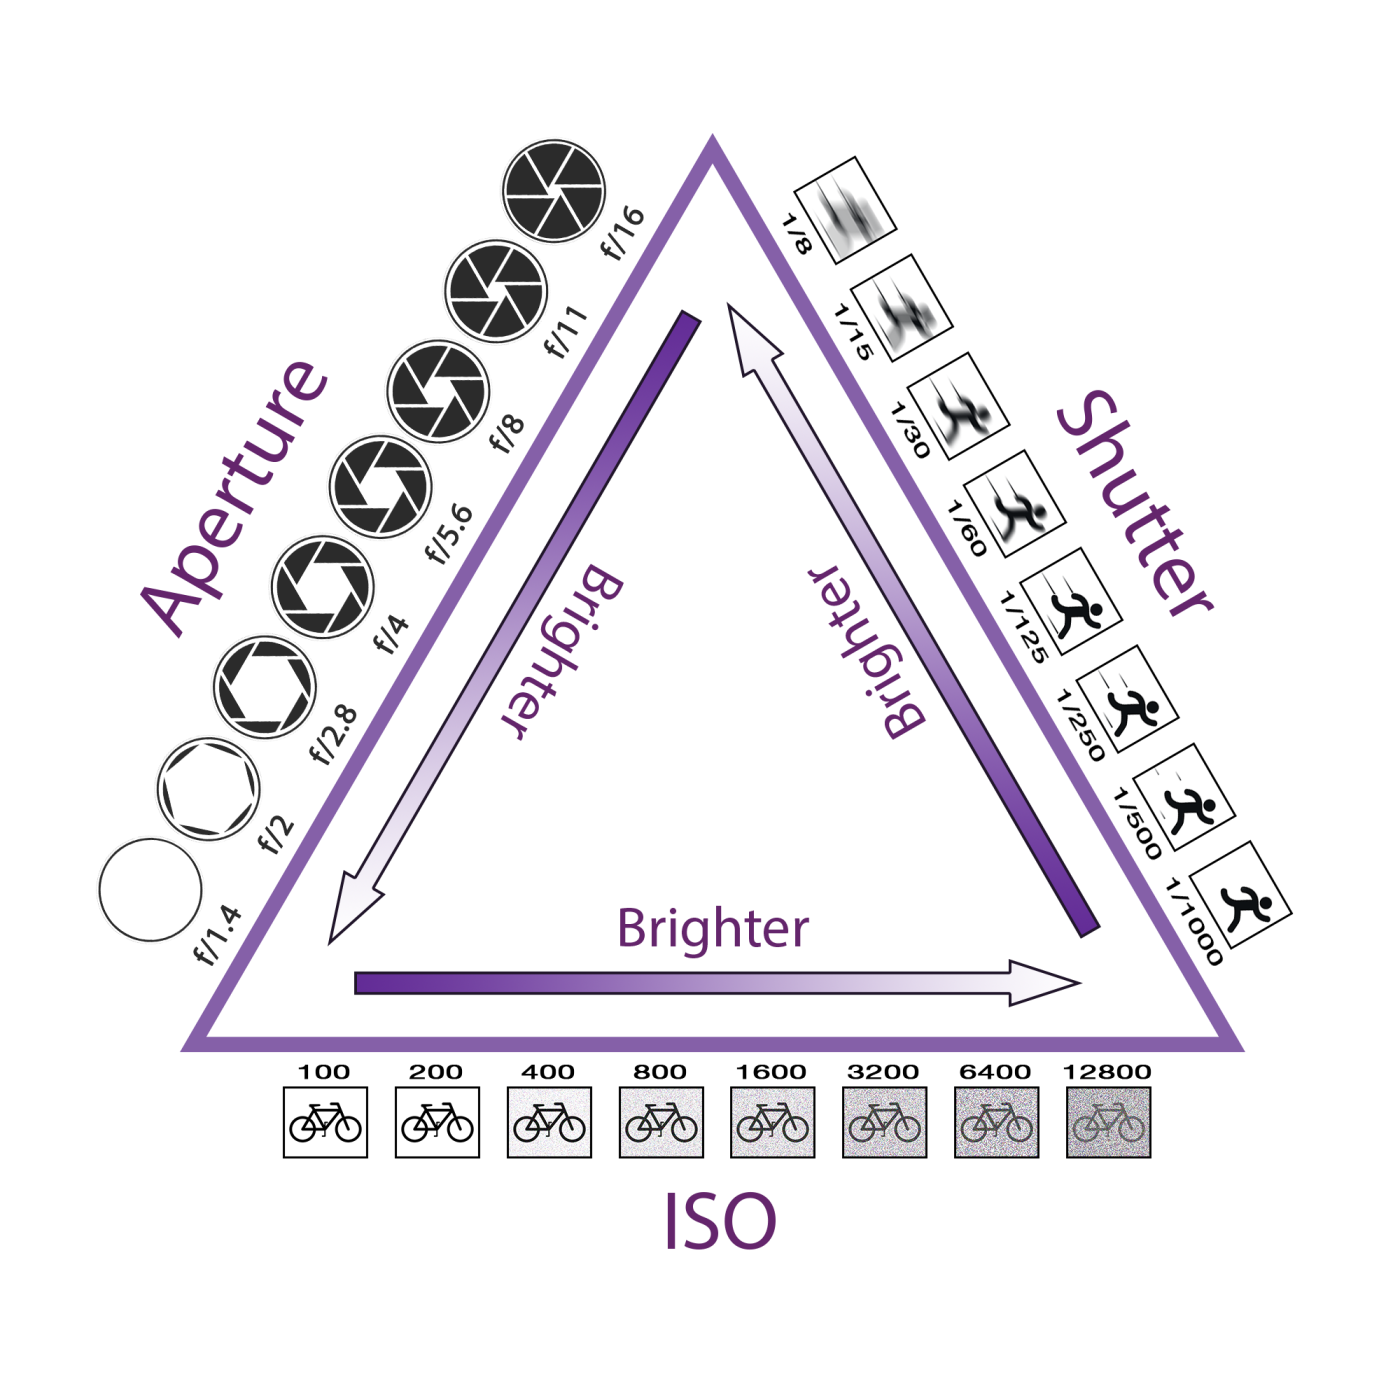 ../../../_images/exposure-triangle.png